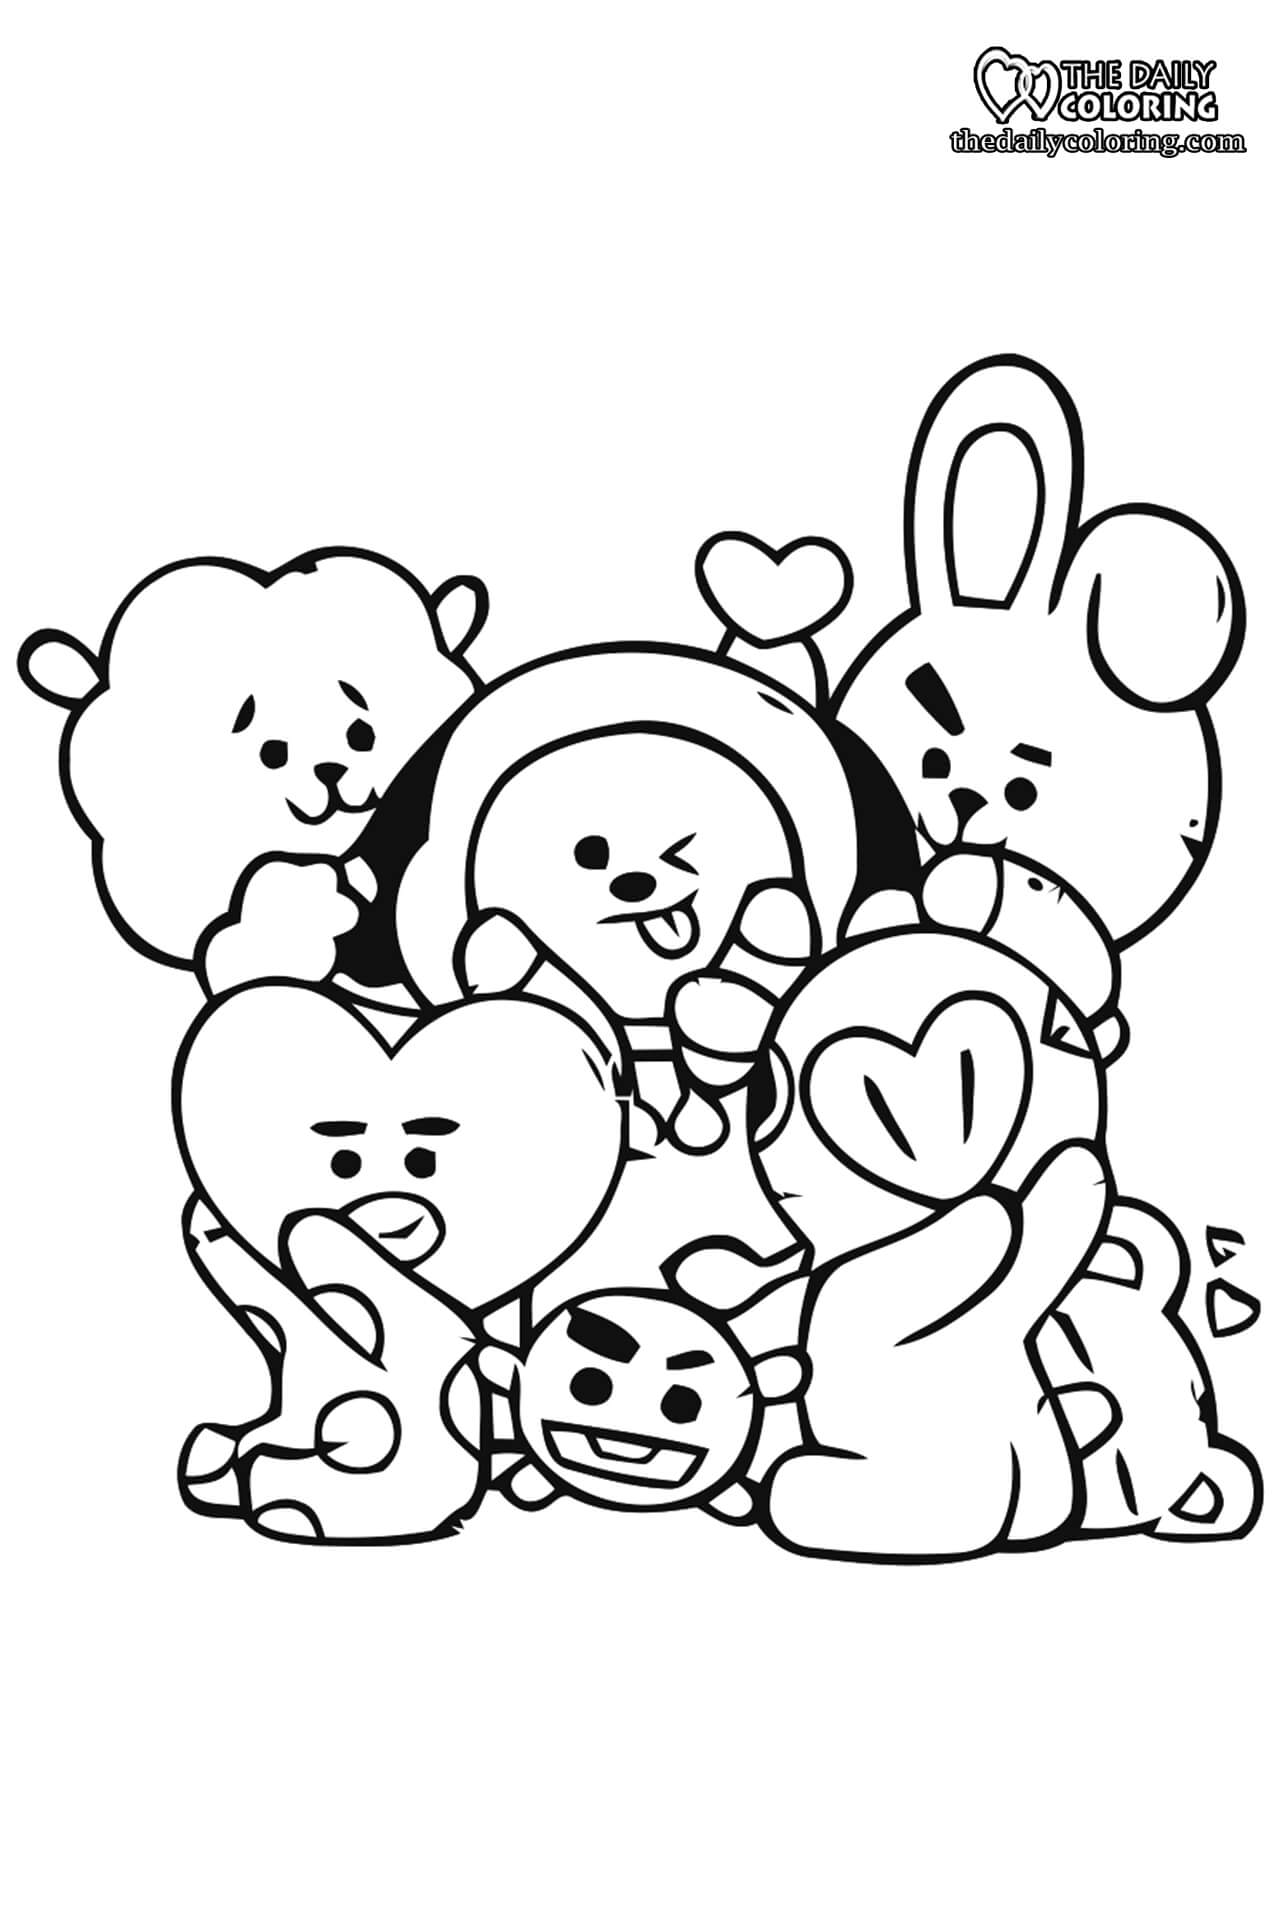 bt21-new-2022-coloring-page